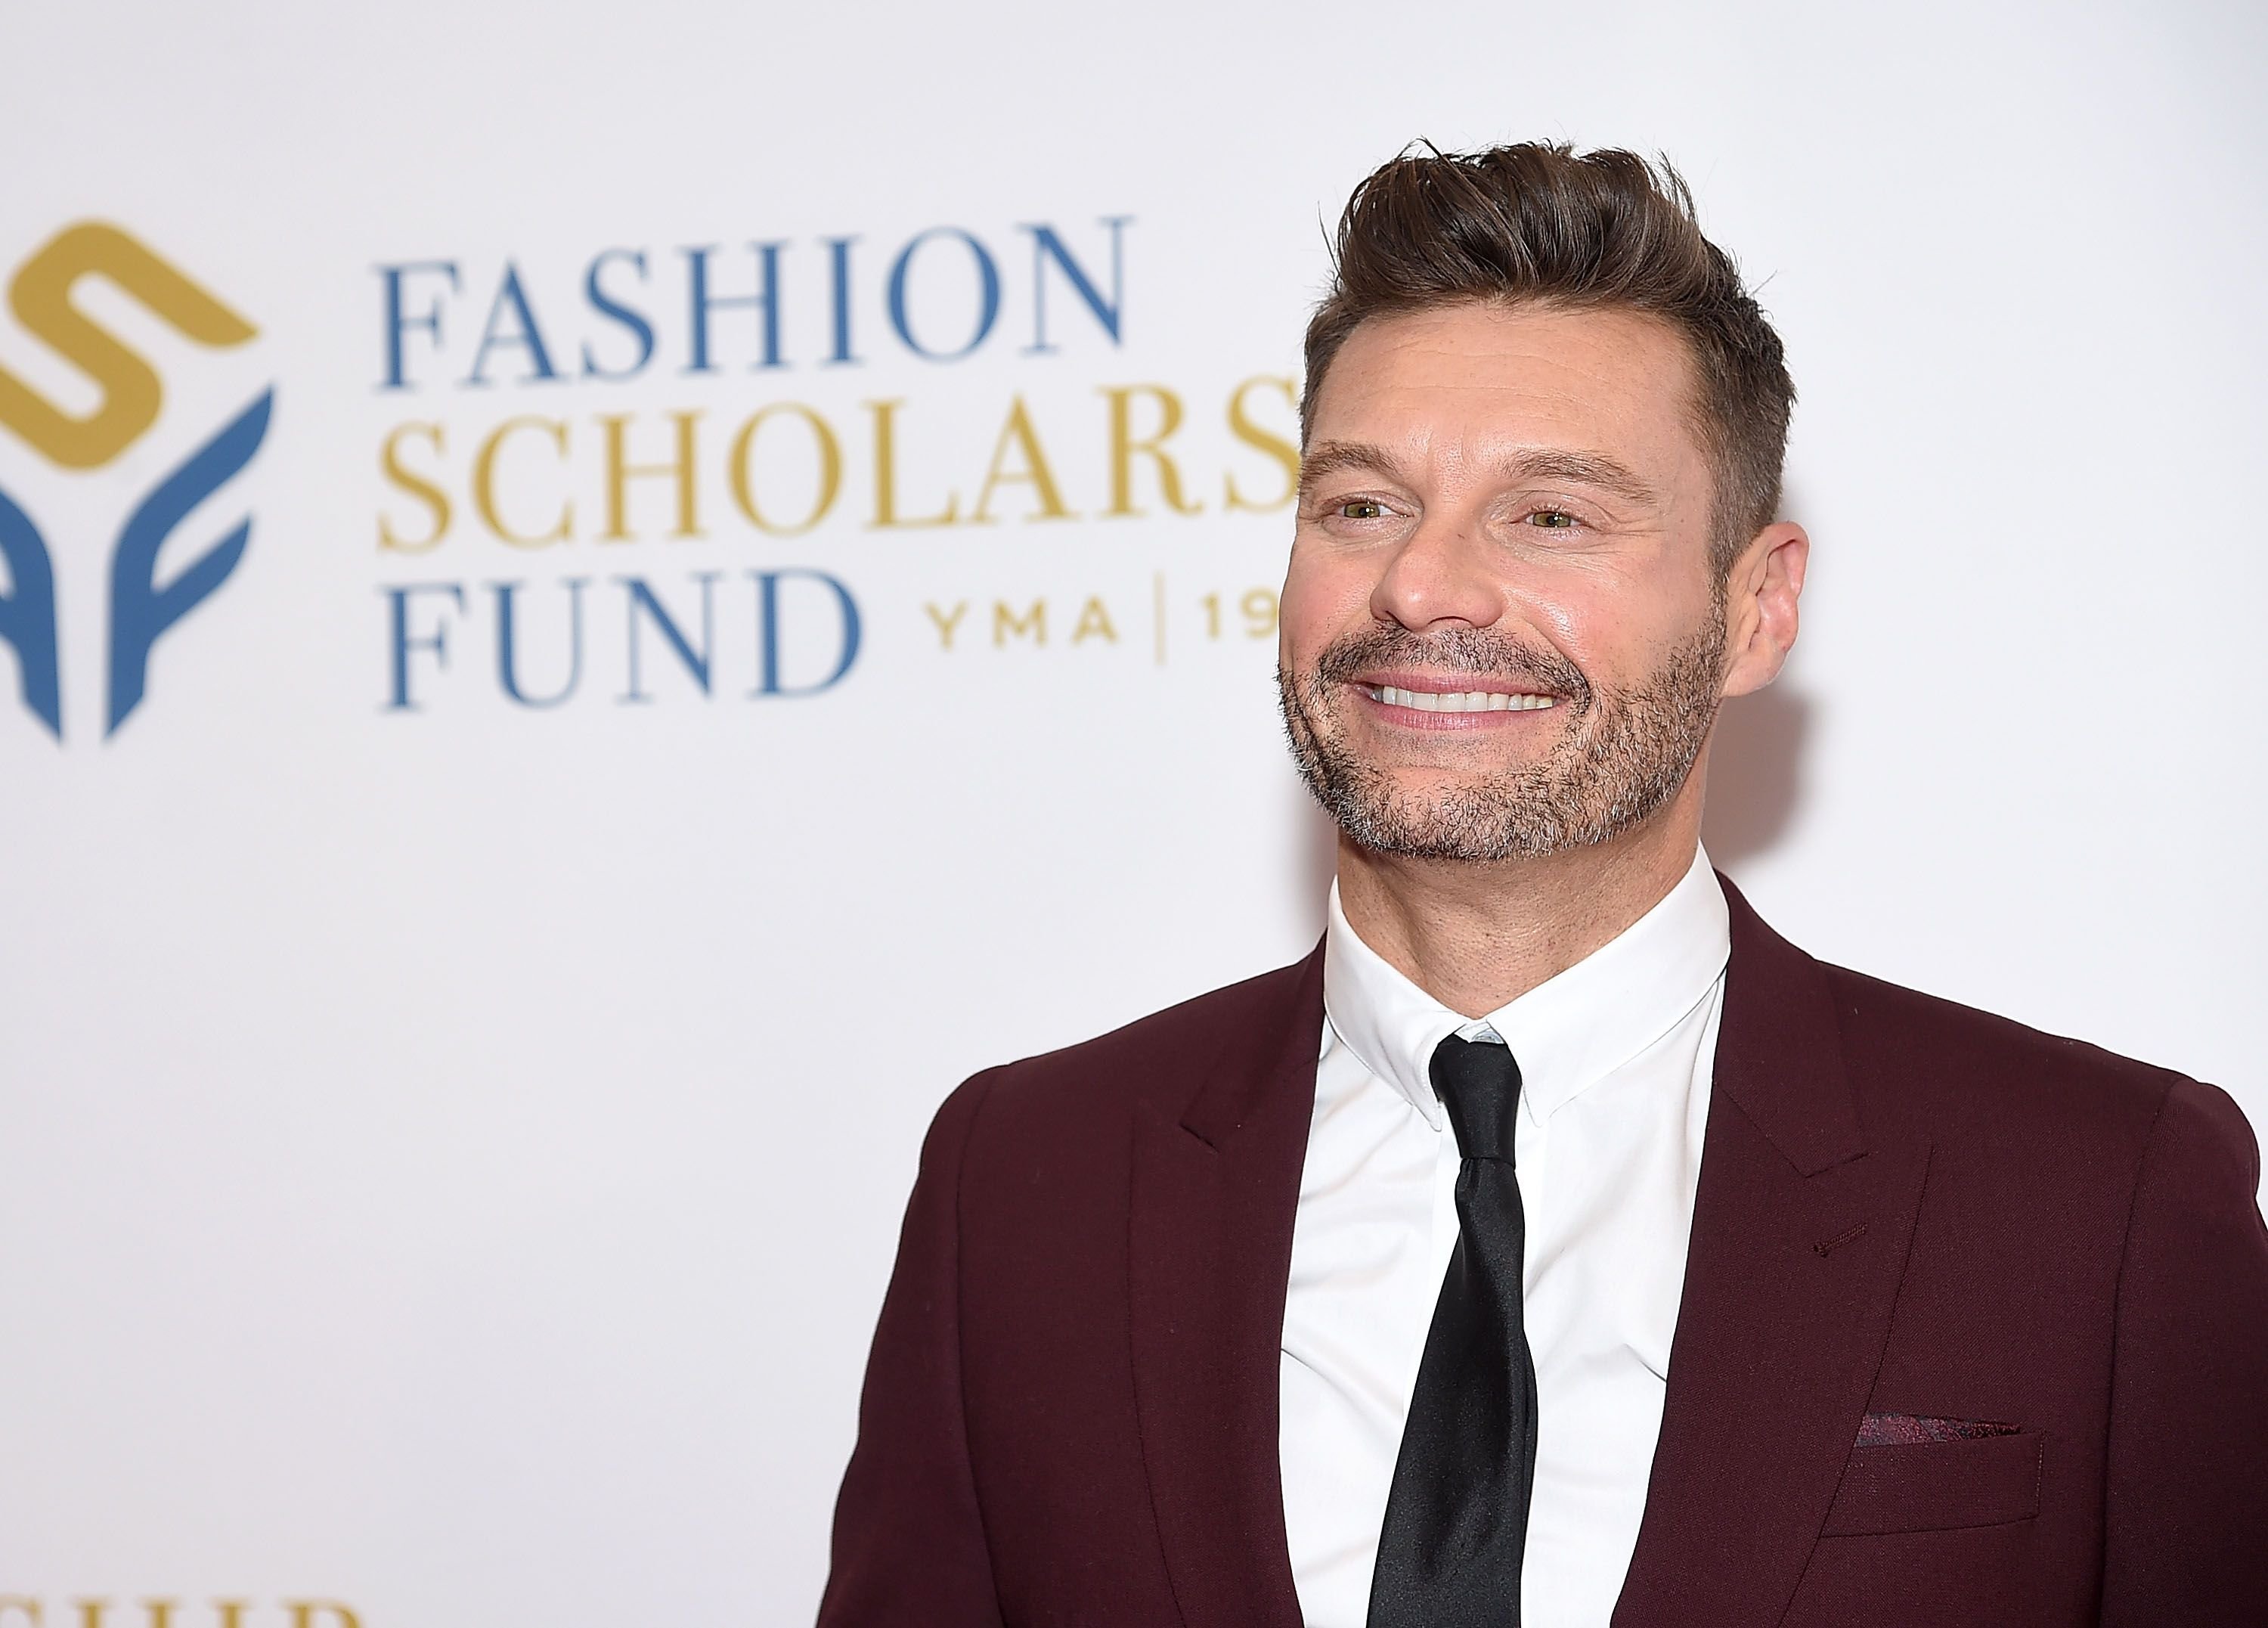 Ryan Seacrest during the 2019 Fashion Scholarship Fund Awards Gala on January 10 in New York City. | Source: Getty Images